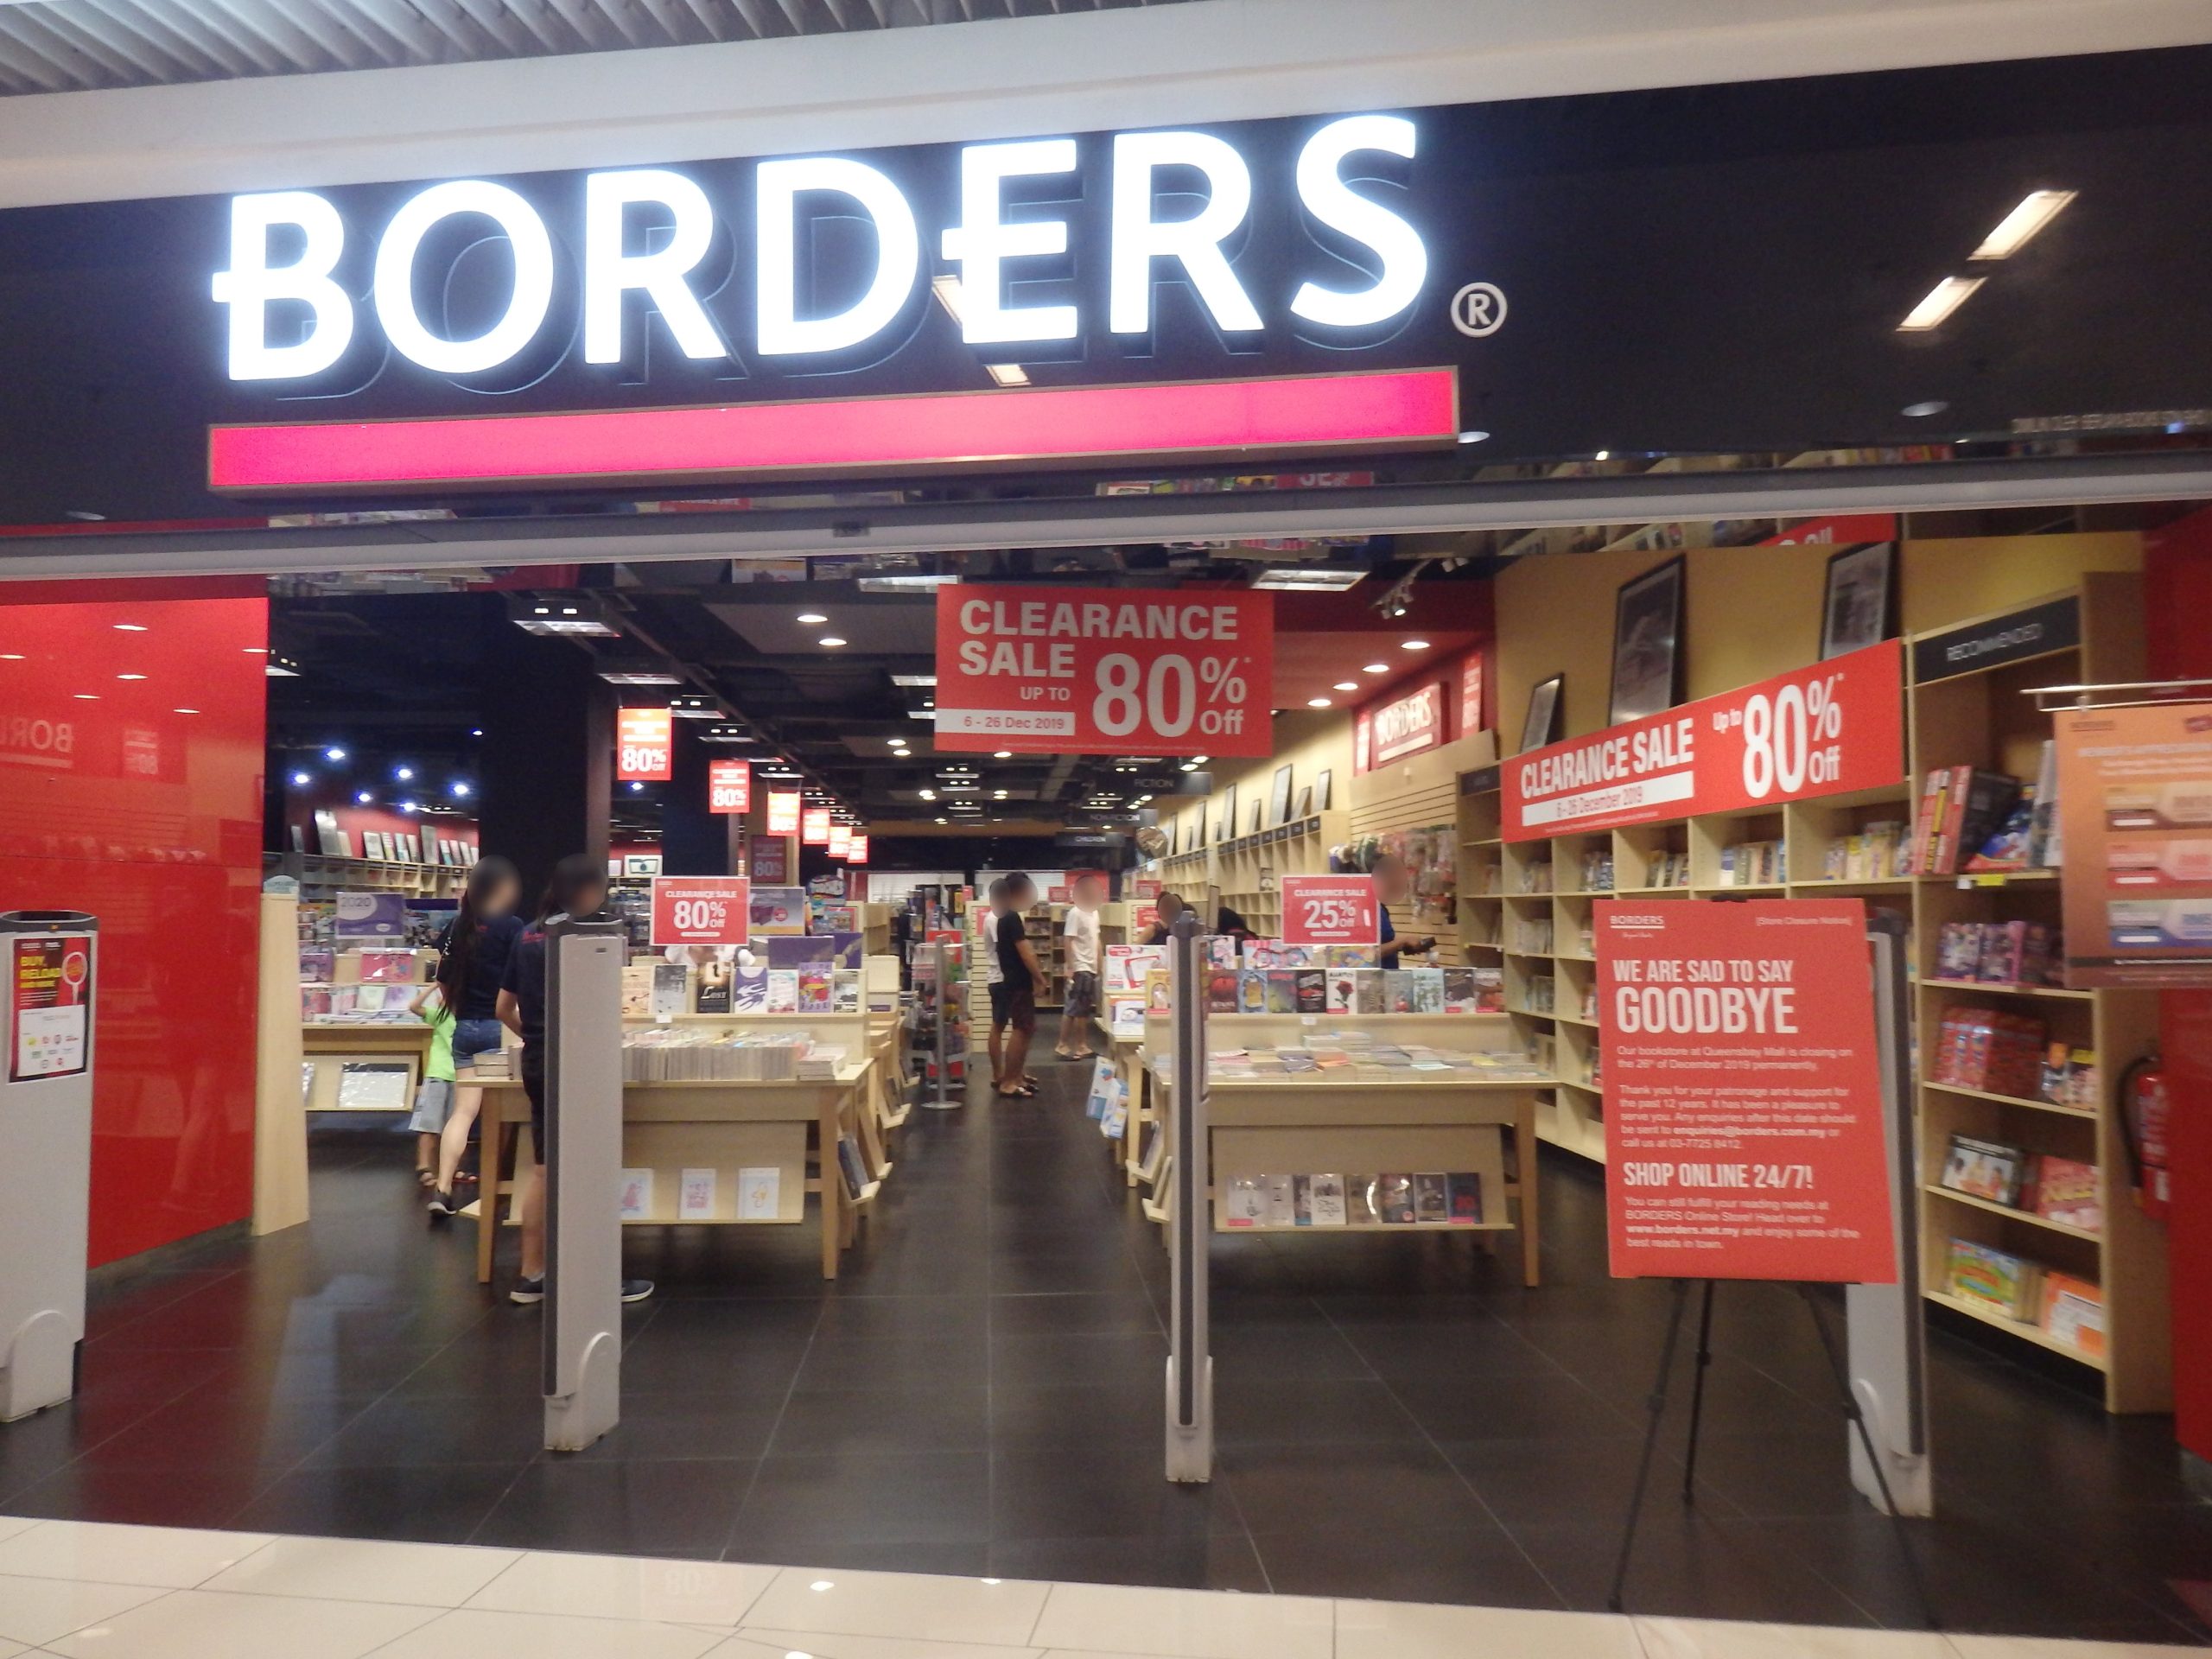 Entry to a Borders bookstore.